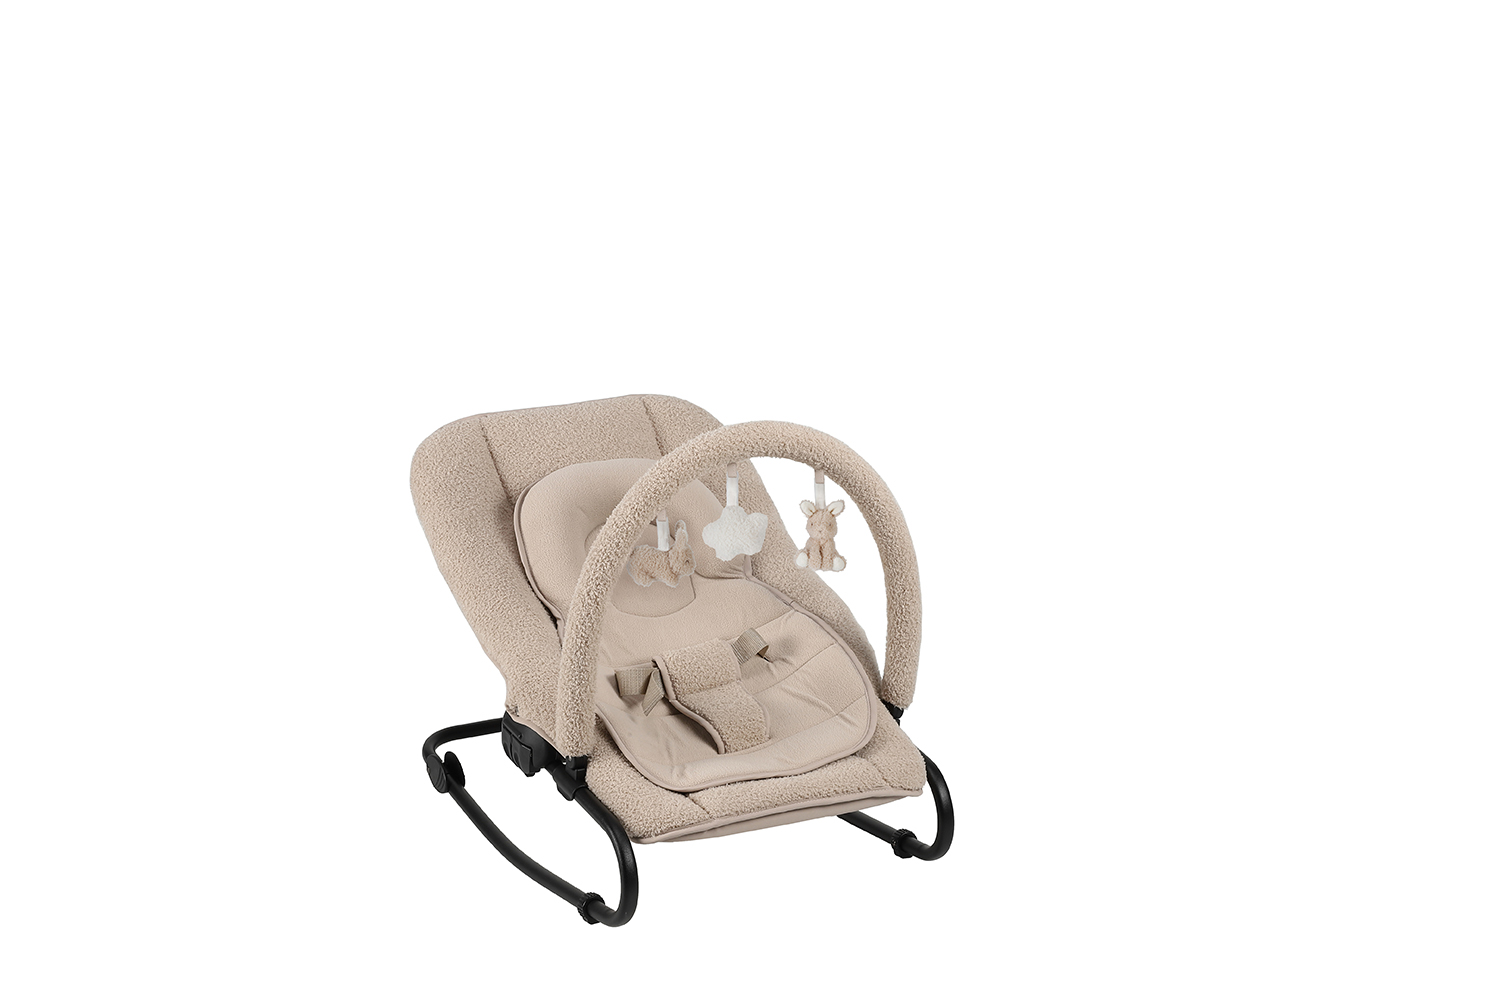 Kinderwippe Babywippe Baby Bunny beige